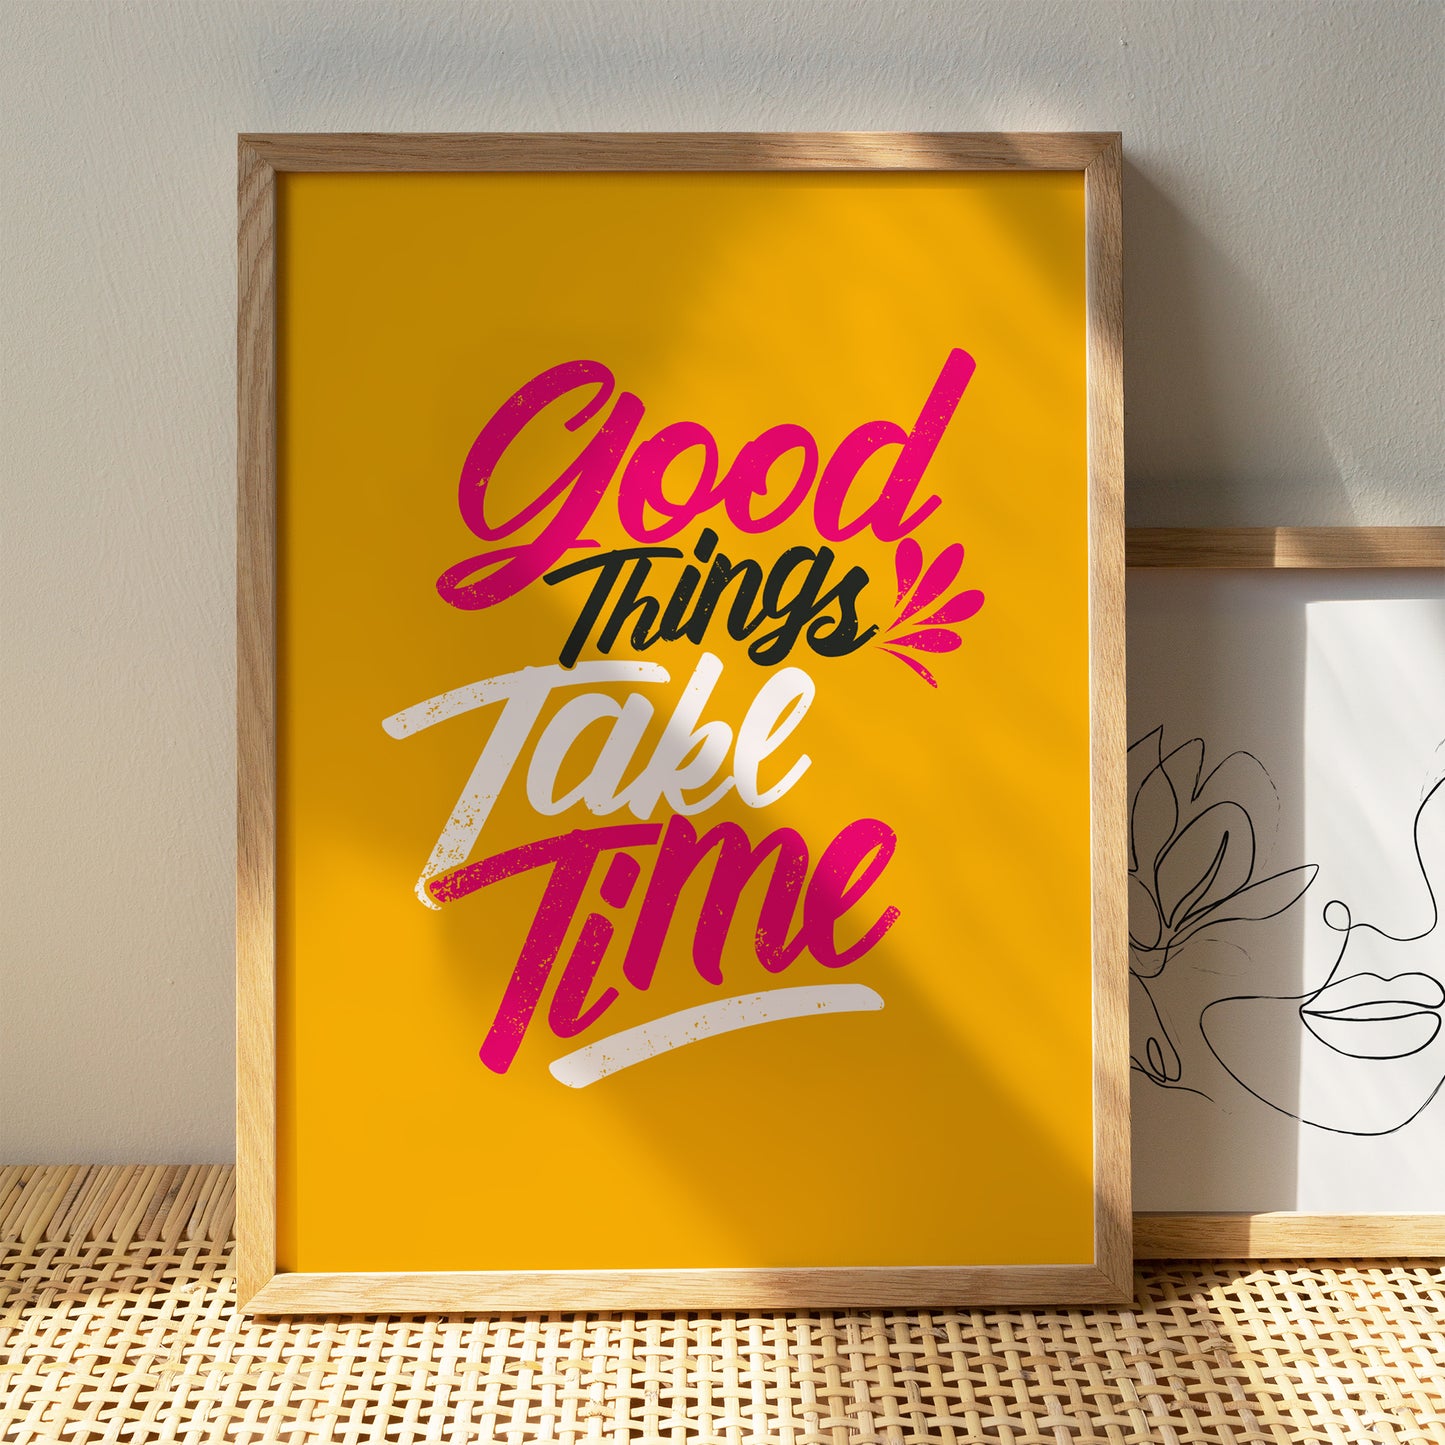 Good Things Take Time - Motivational Poster